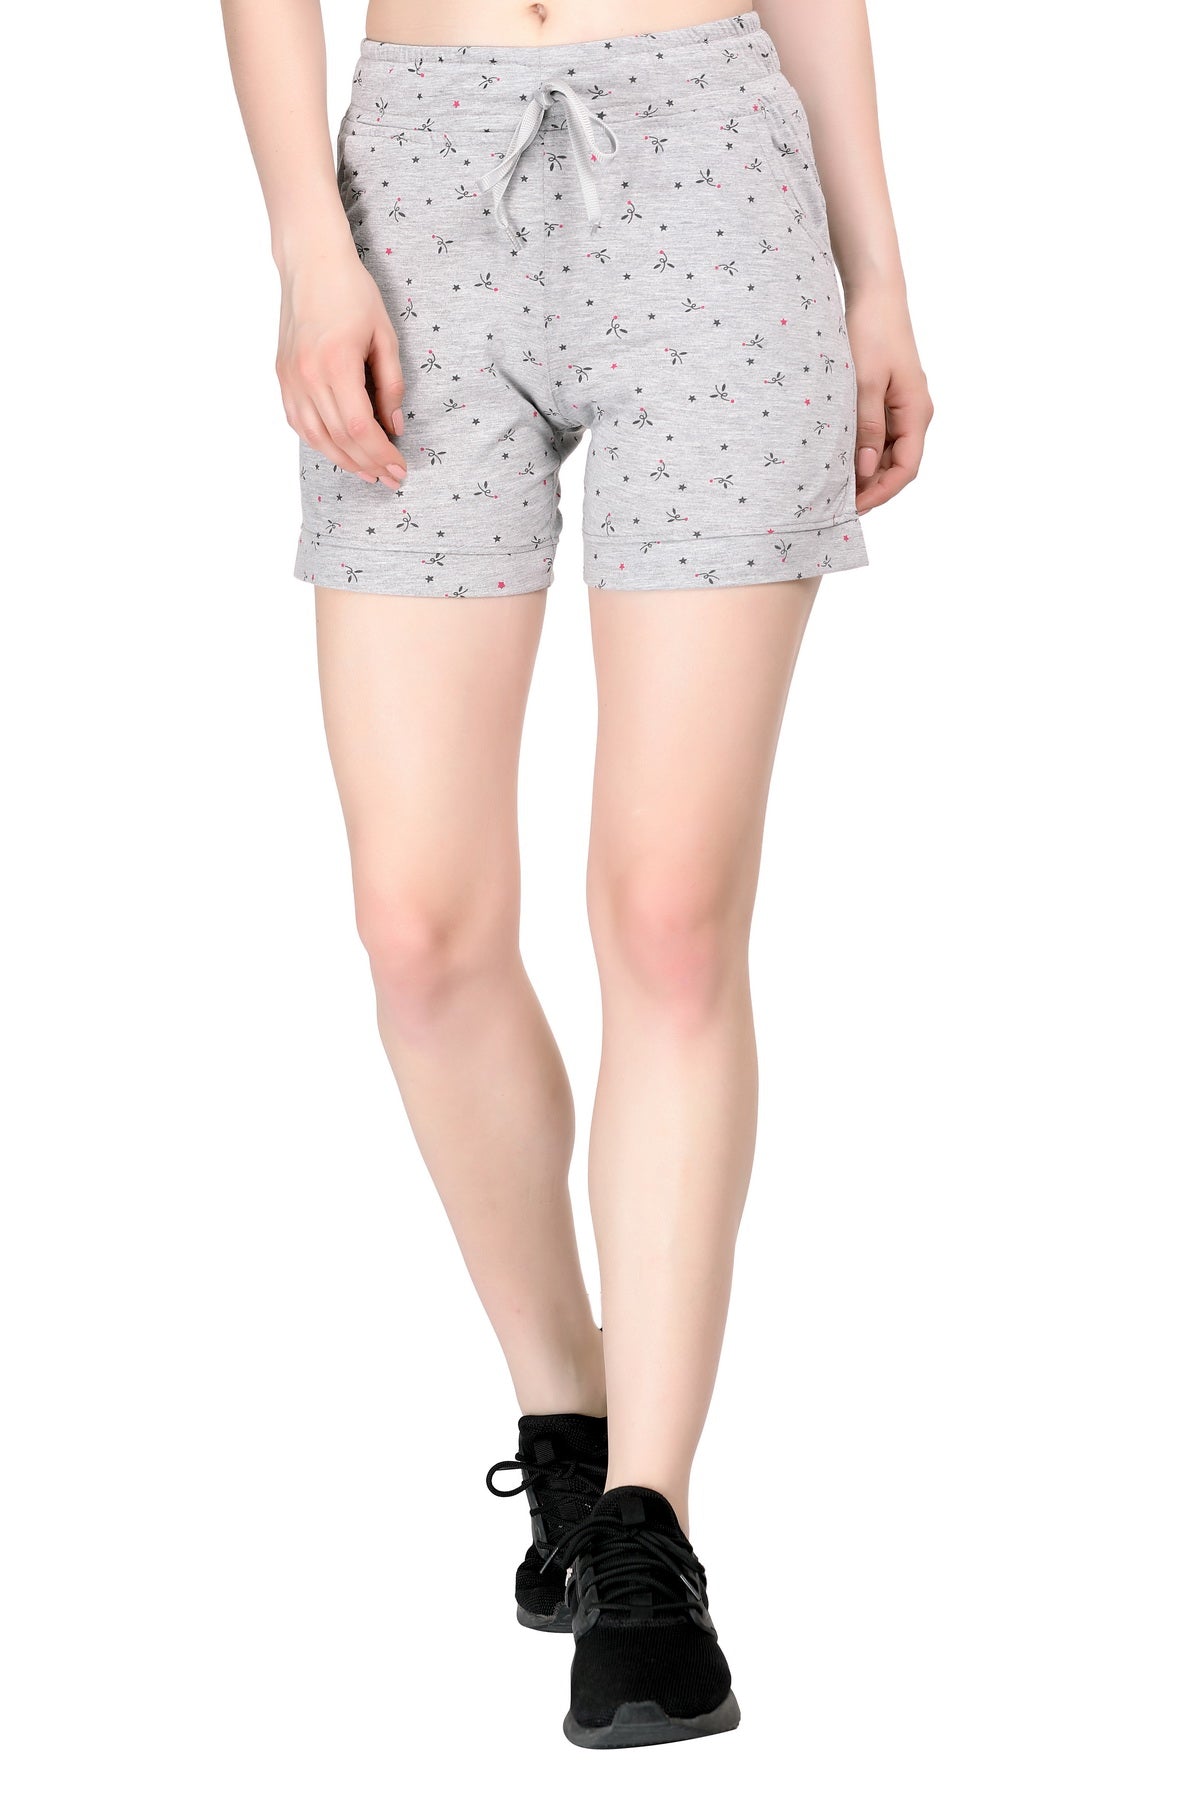 Comfortable Grey Printed Cotton Lounge Shorts For Women Online In India